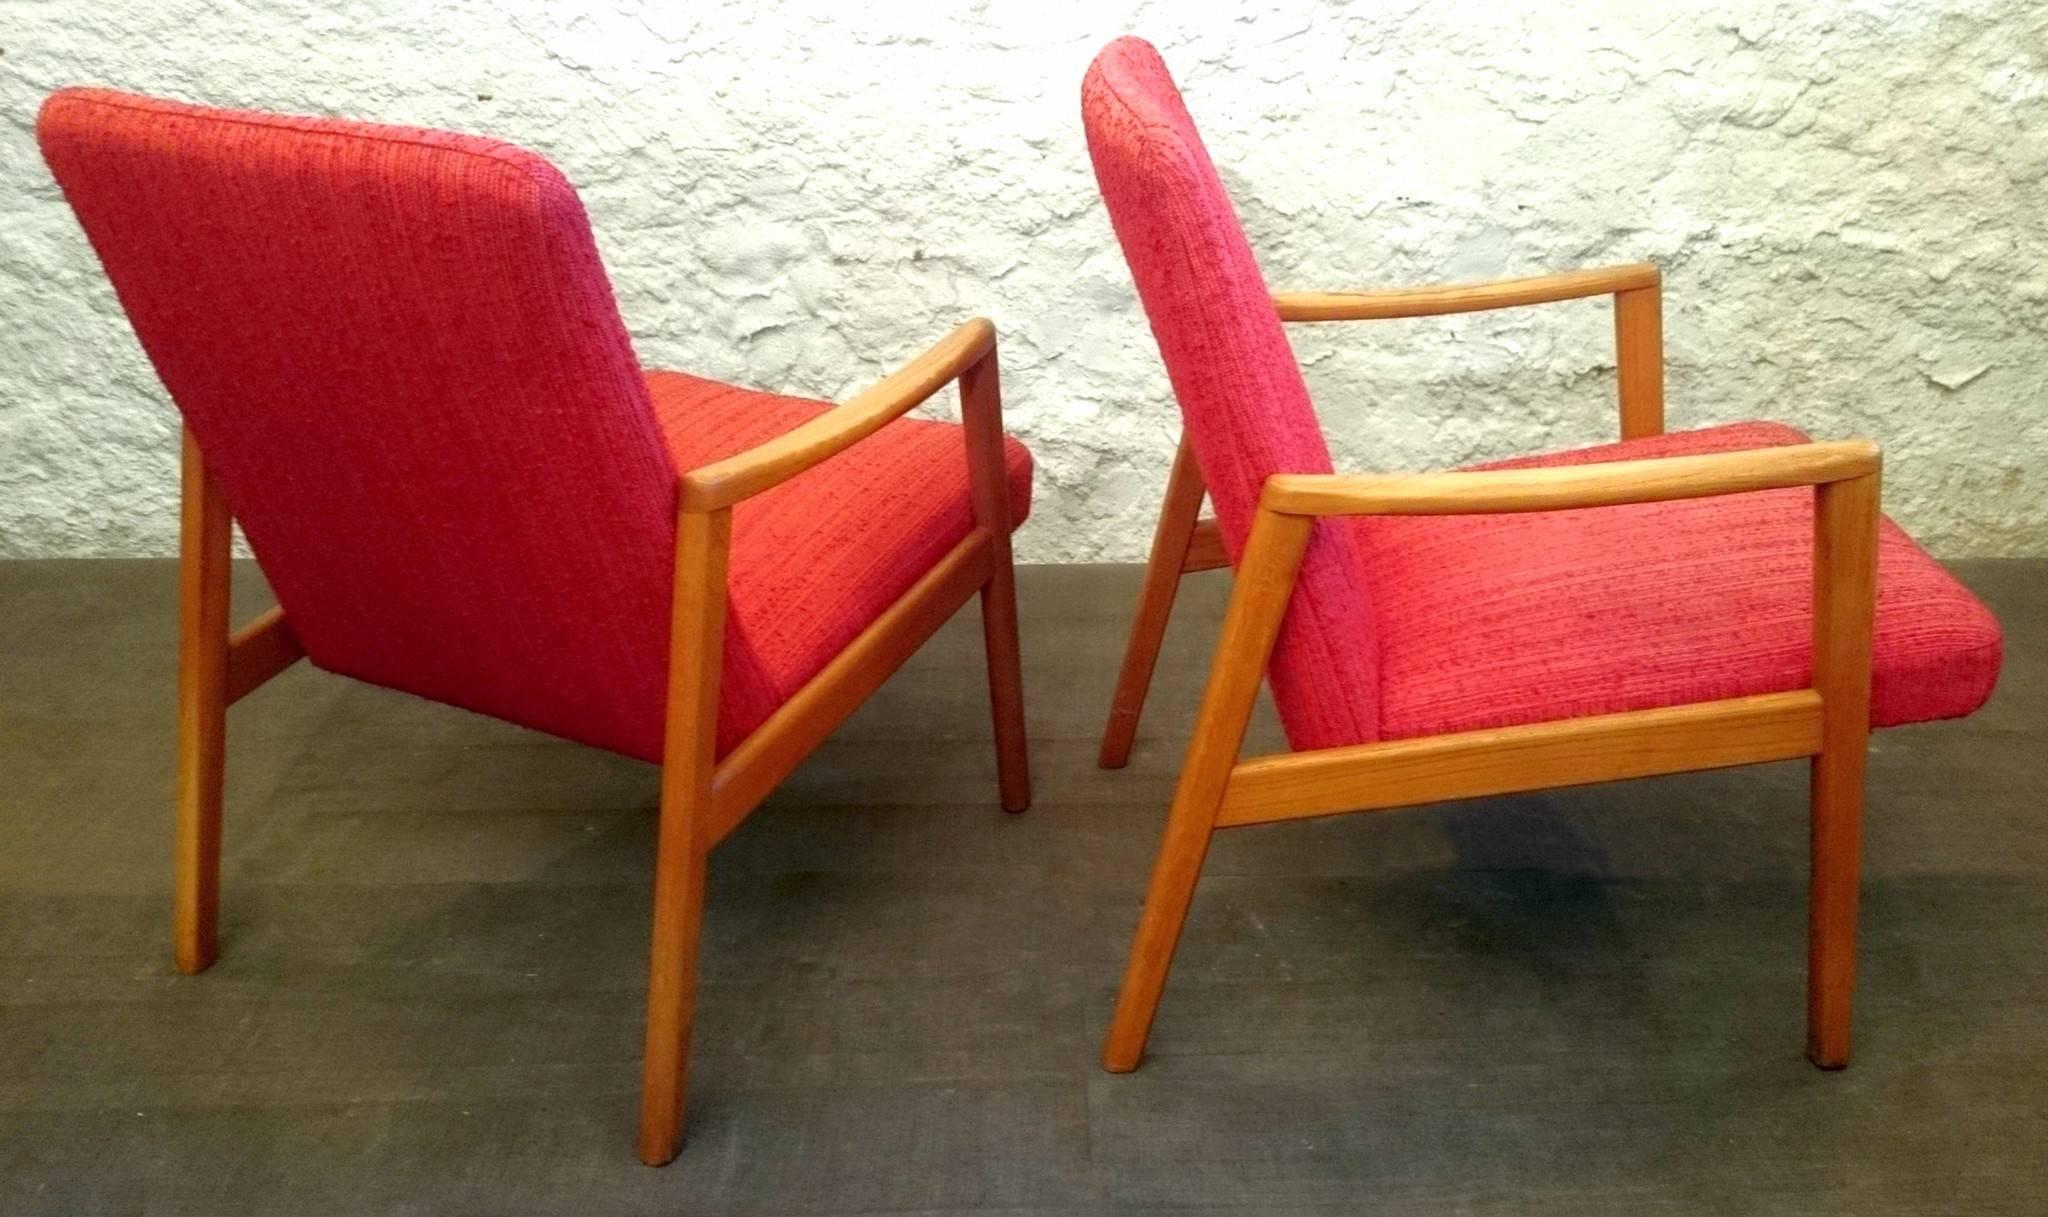 A pair of´Swedish 1950s oak armchairs with original fabric in strawberry red wool. Stabile and good condition. Additional pics can be sent upon request. Excellent pieces for reupholstering in your own fabric.